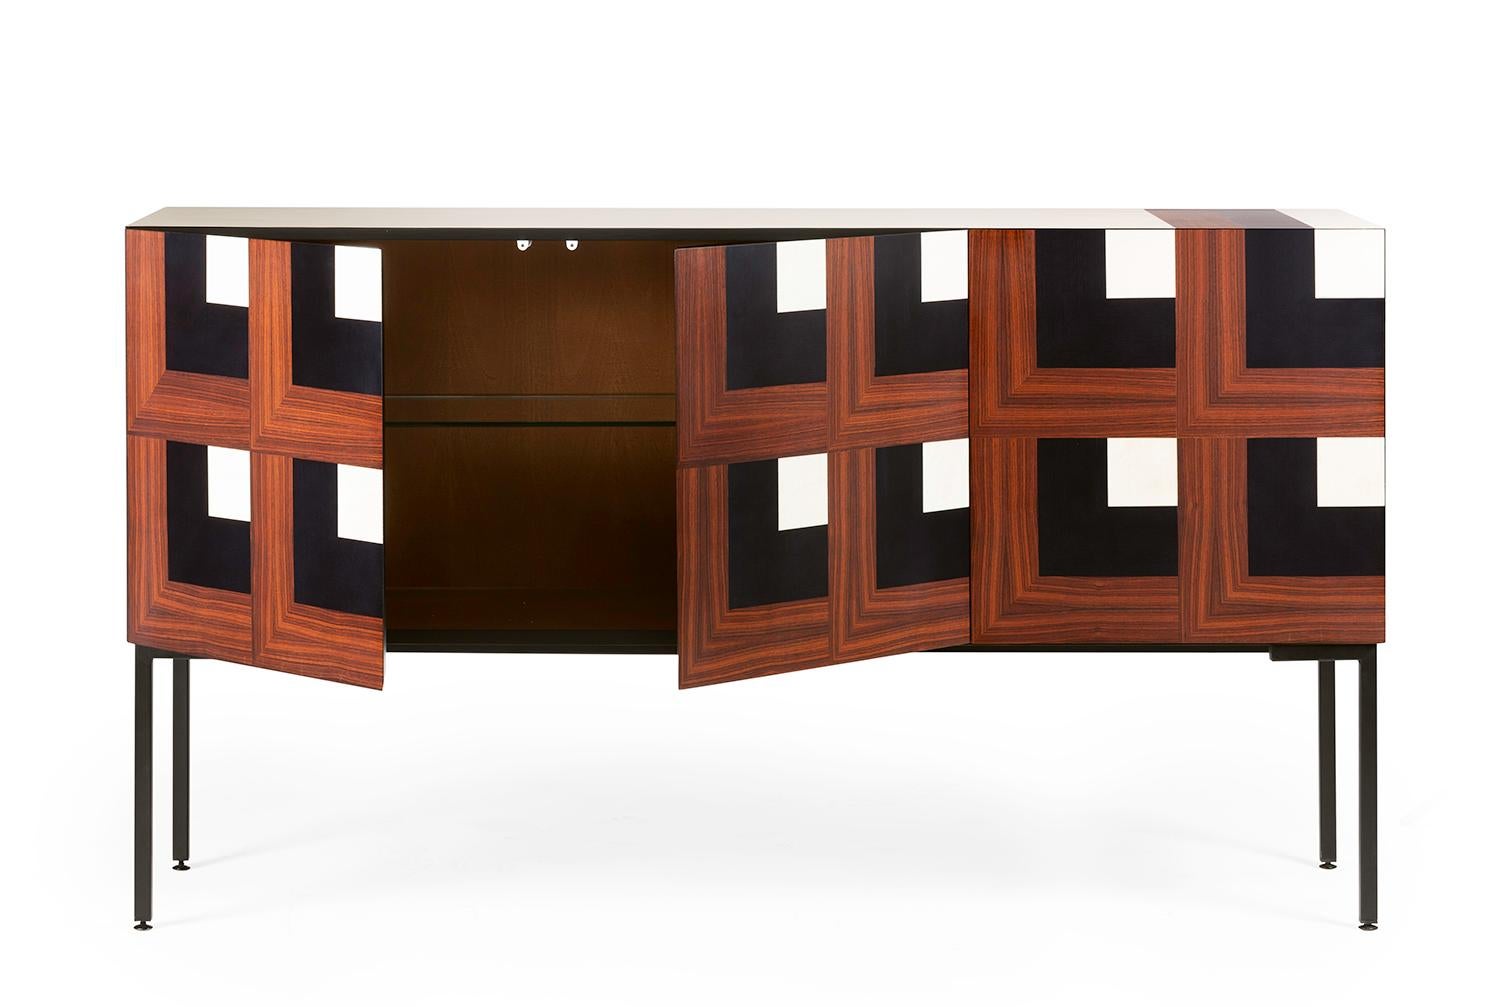 Italian 21st Century Cubo Inlaid Sideboard in Ash, Maple, Walnut, Made in Italy, Hebanon For Sale